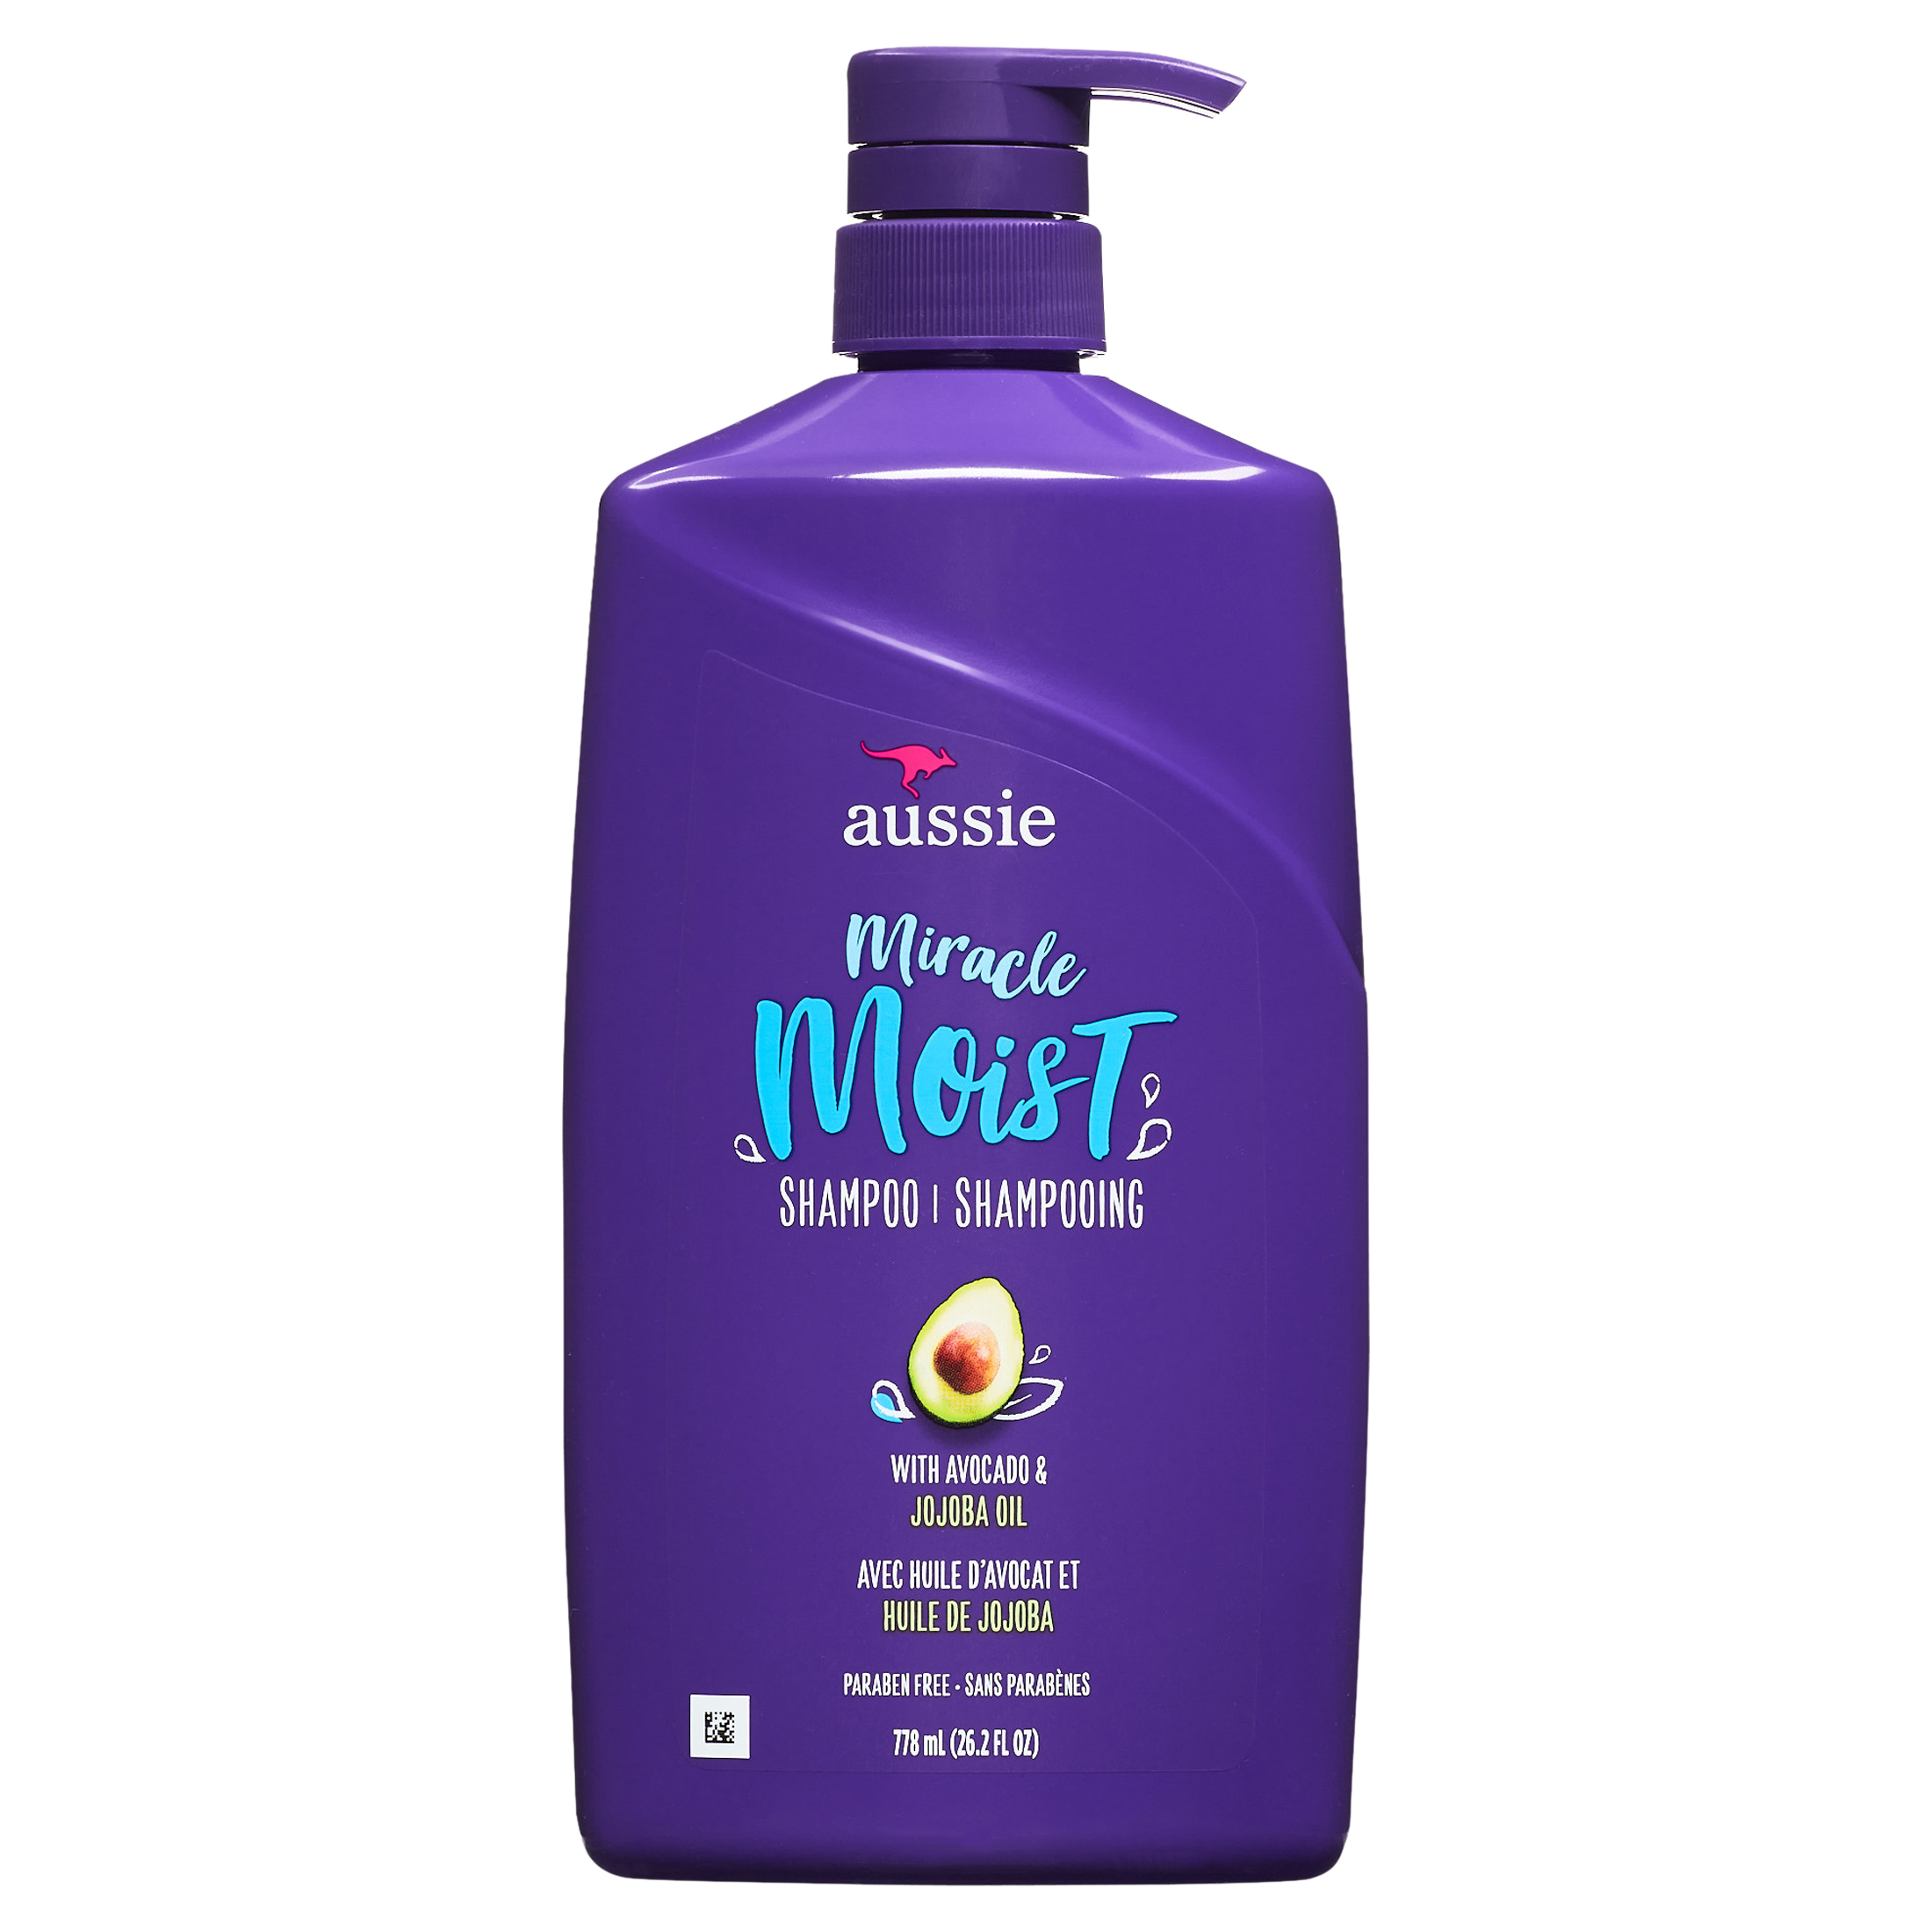 Aussie Miracle Moist Shampoo with Avocado, Paraben Free,  For All Hair Types 26.2 fl oz - image 1 of 9